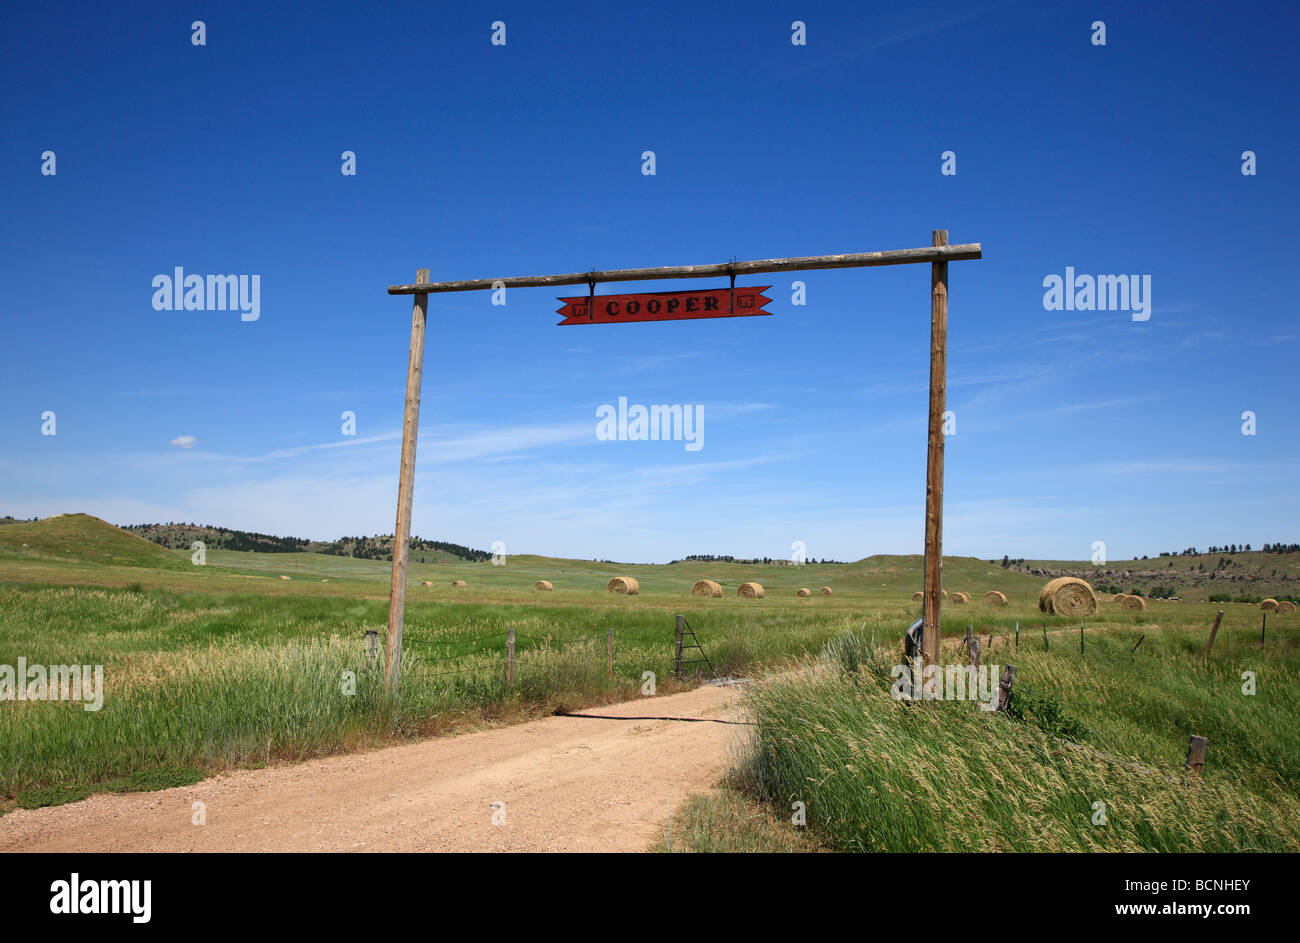 A ranch gate in Eastern Wyoming near the South Dakota state line. Stock Photo